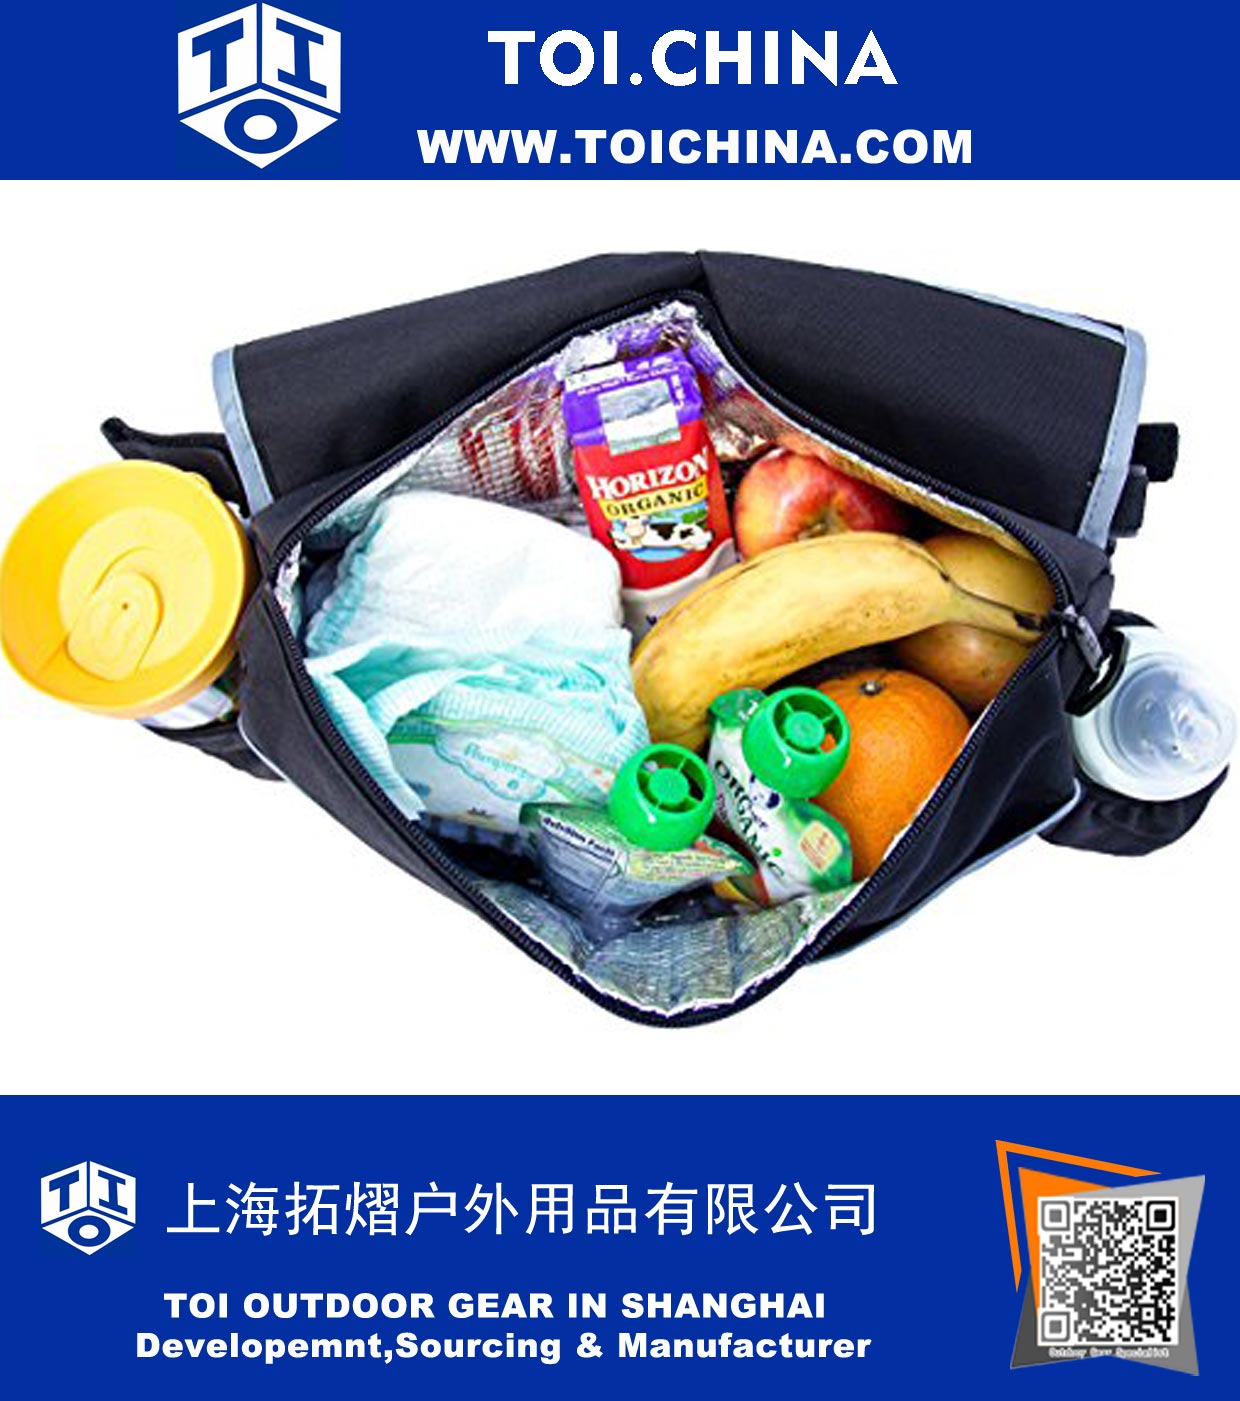 5-In-1 Insulated Stroller Bag